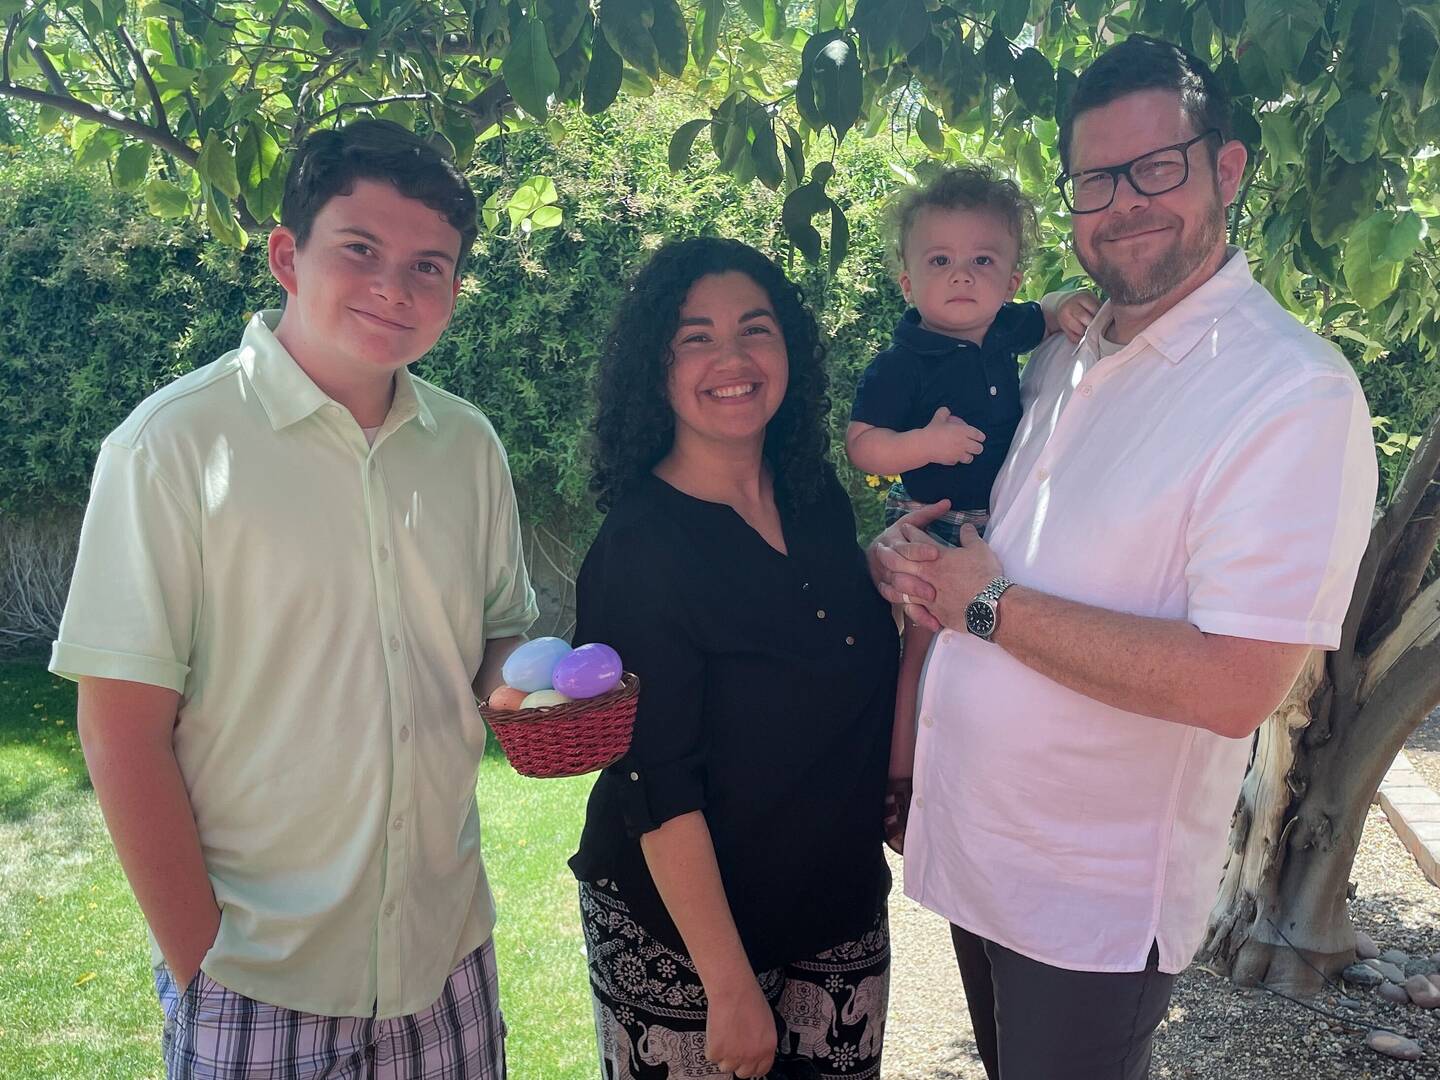 Author celebrating Easter with his wife and two sons.